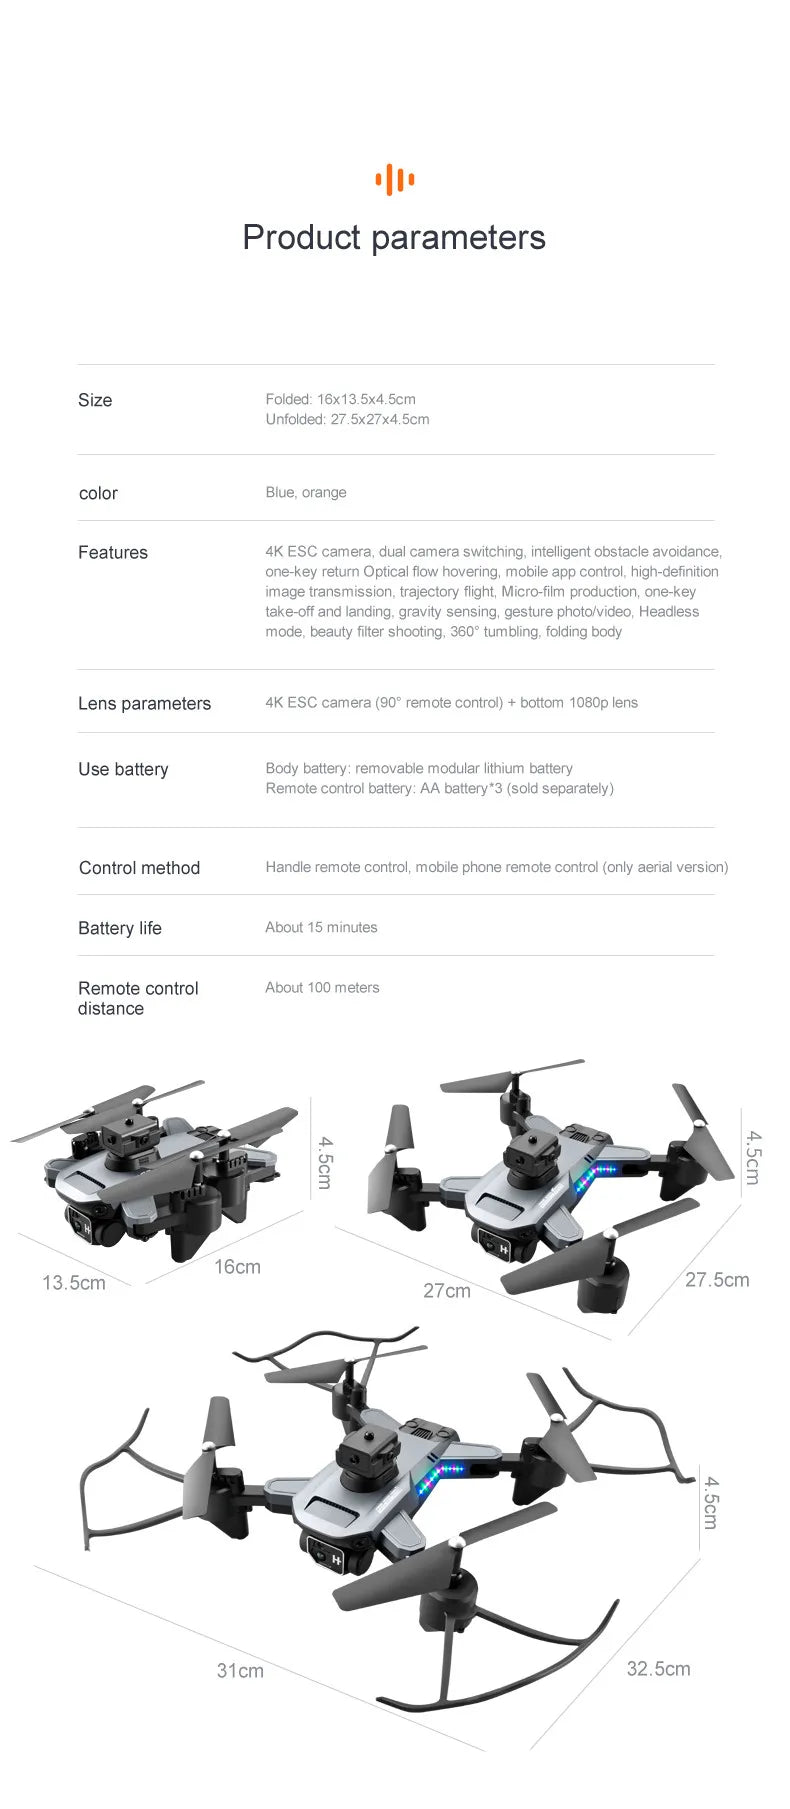 Q7 Drone, 4K ESC camera, dual camera switching; intelligent obstacle avoidance, one-key return